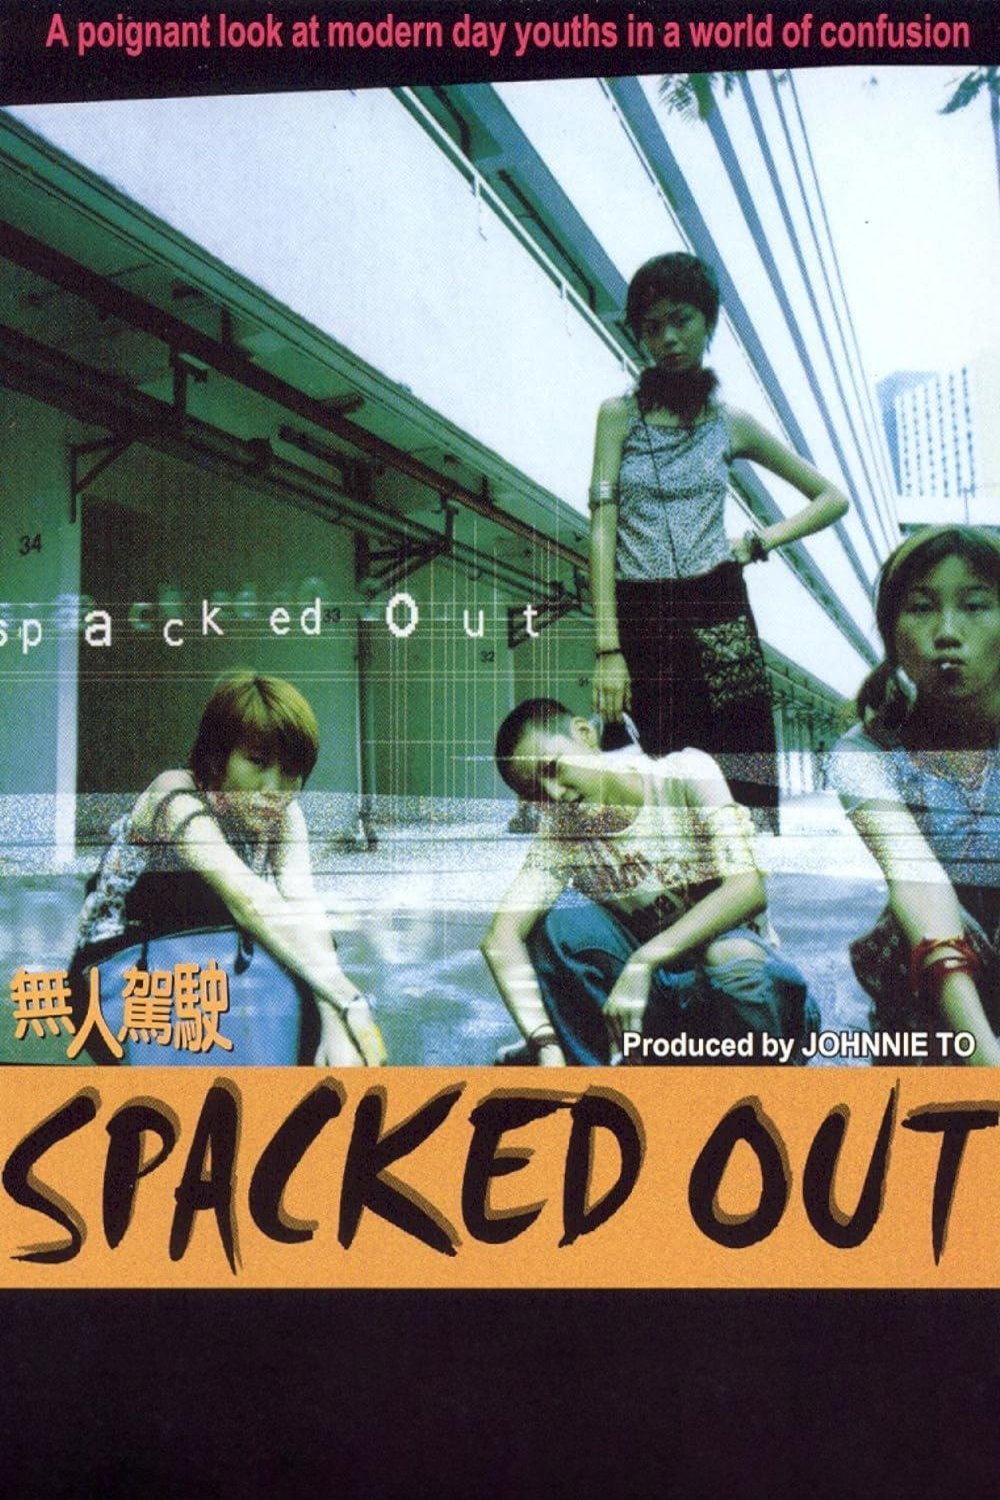 Cantonese poster of the movie Spacked Out